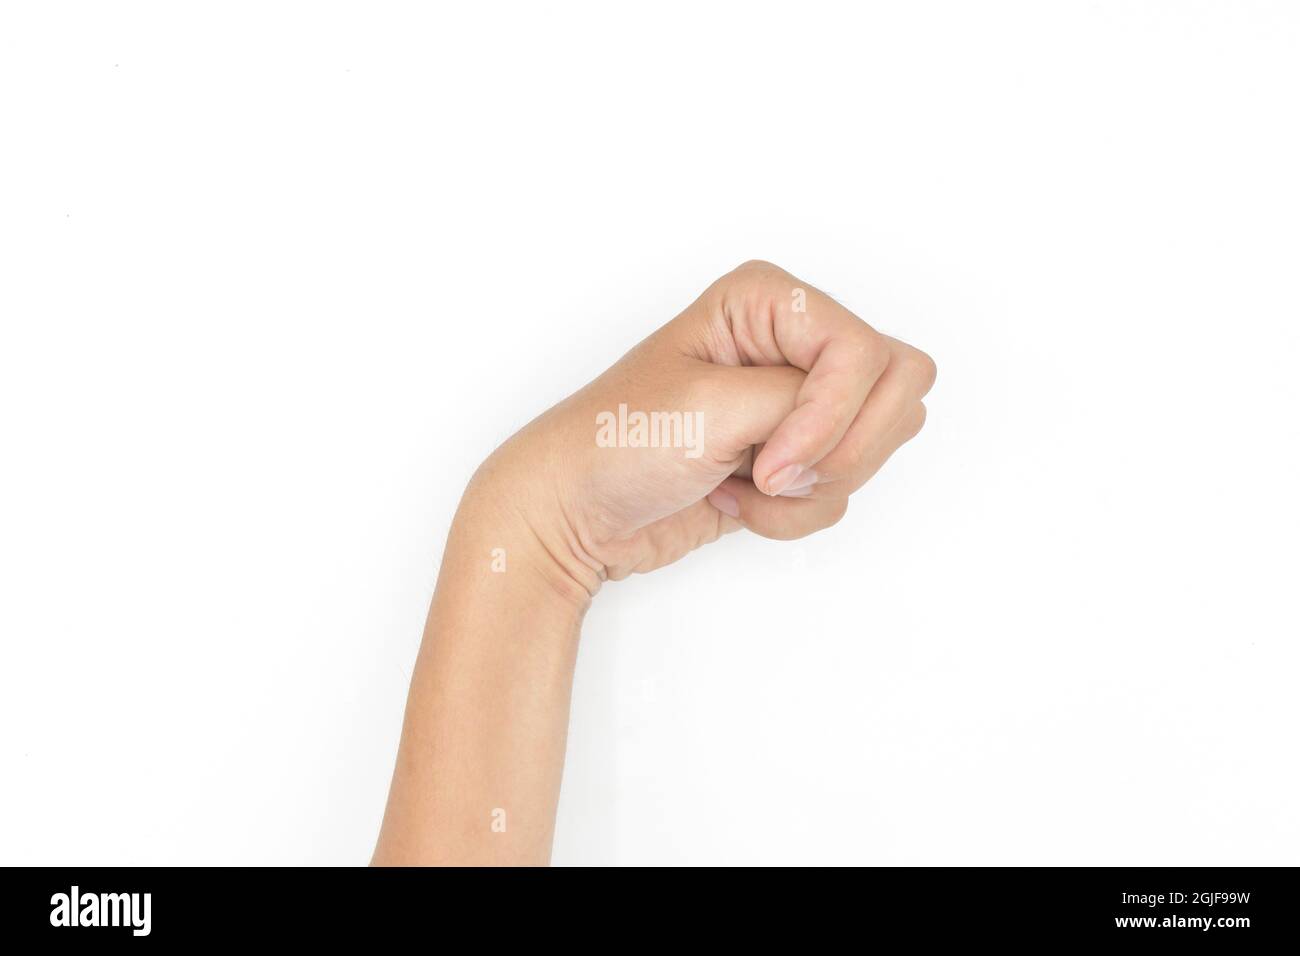 Hand muscle spasm in Asian young man. Unilateral fingers flexion. Isolated on white background. Stock Photo